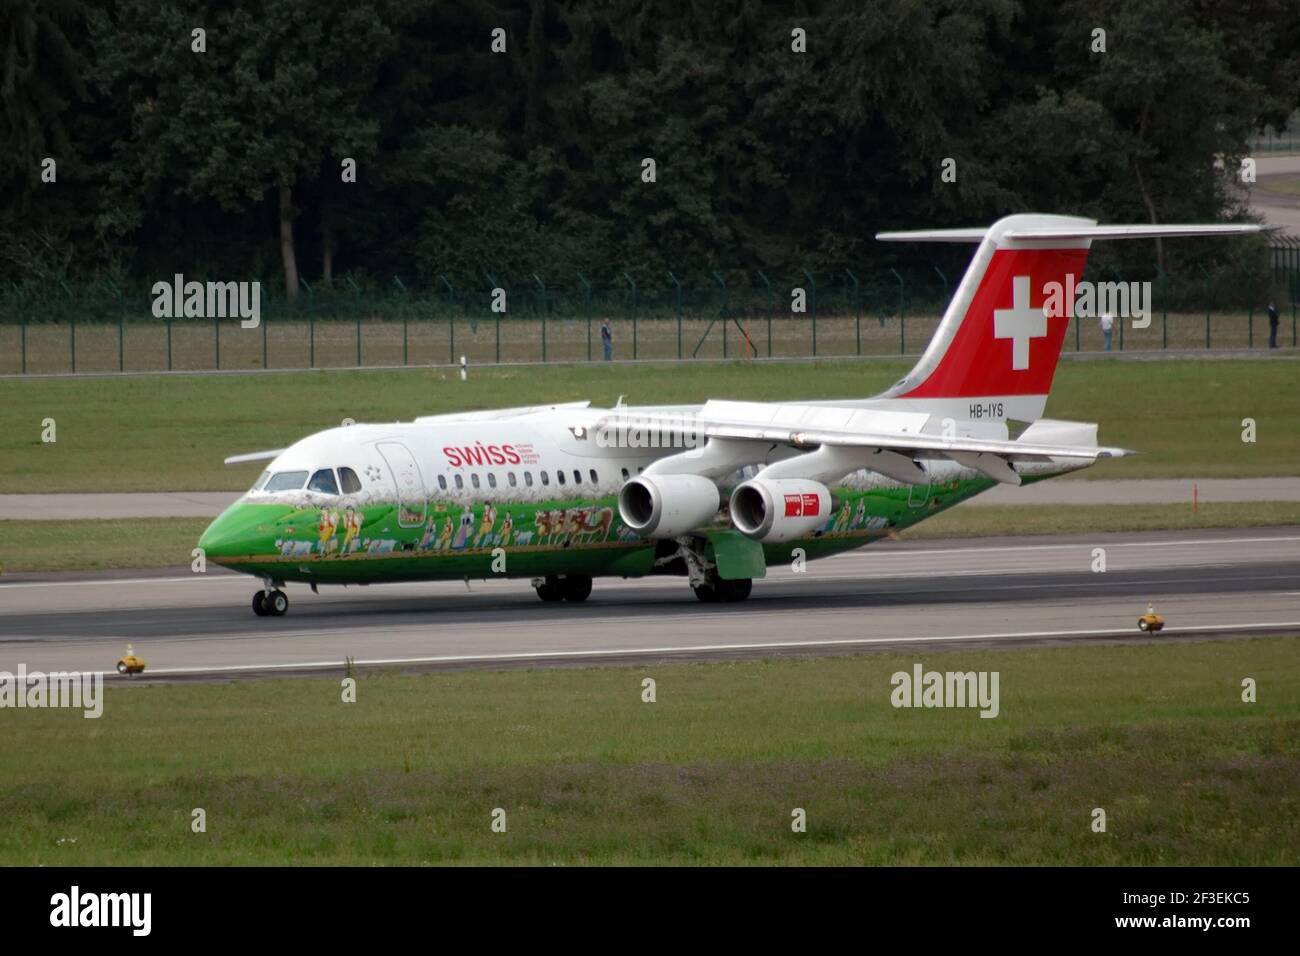 Avro Rj High Resolution Stock Photography and Images - Alamy